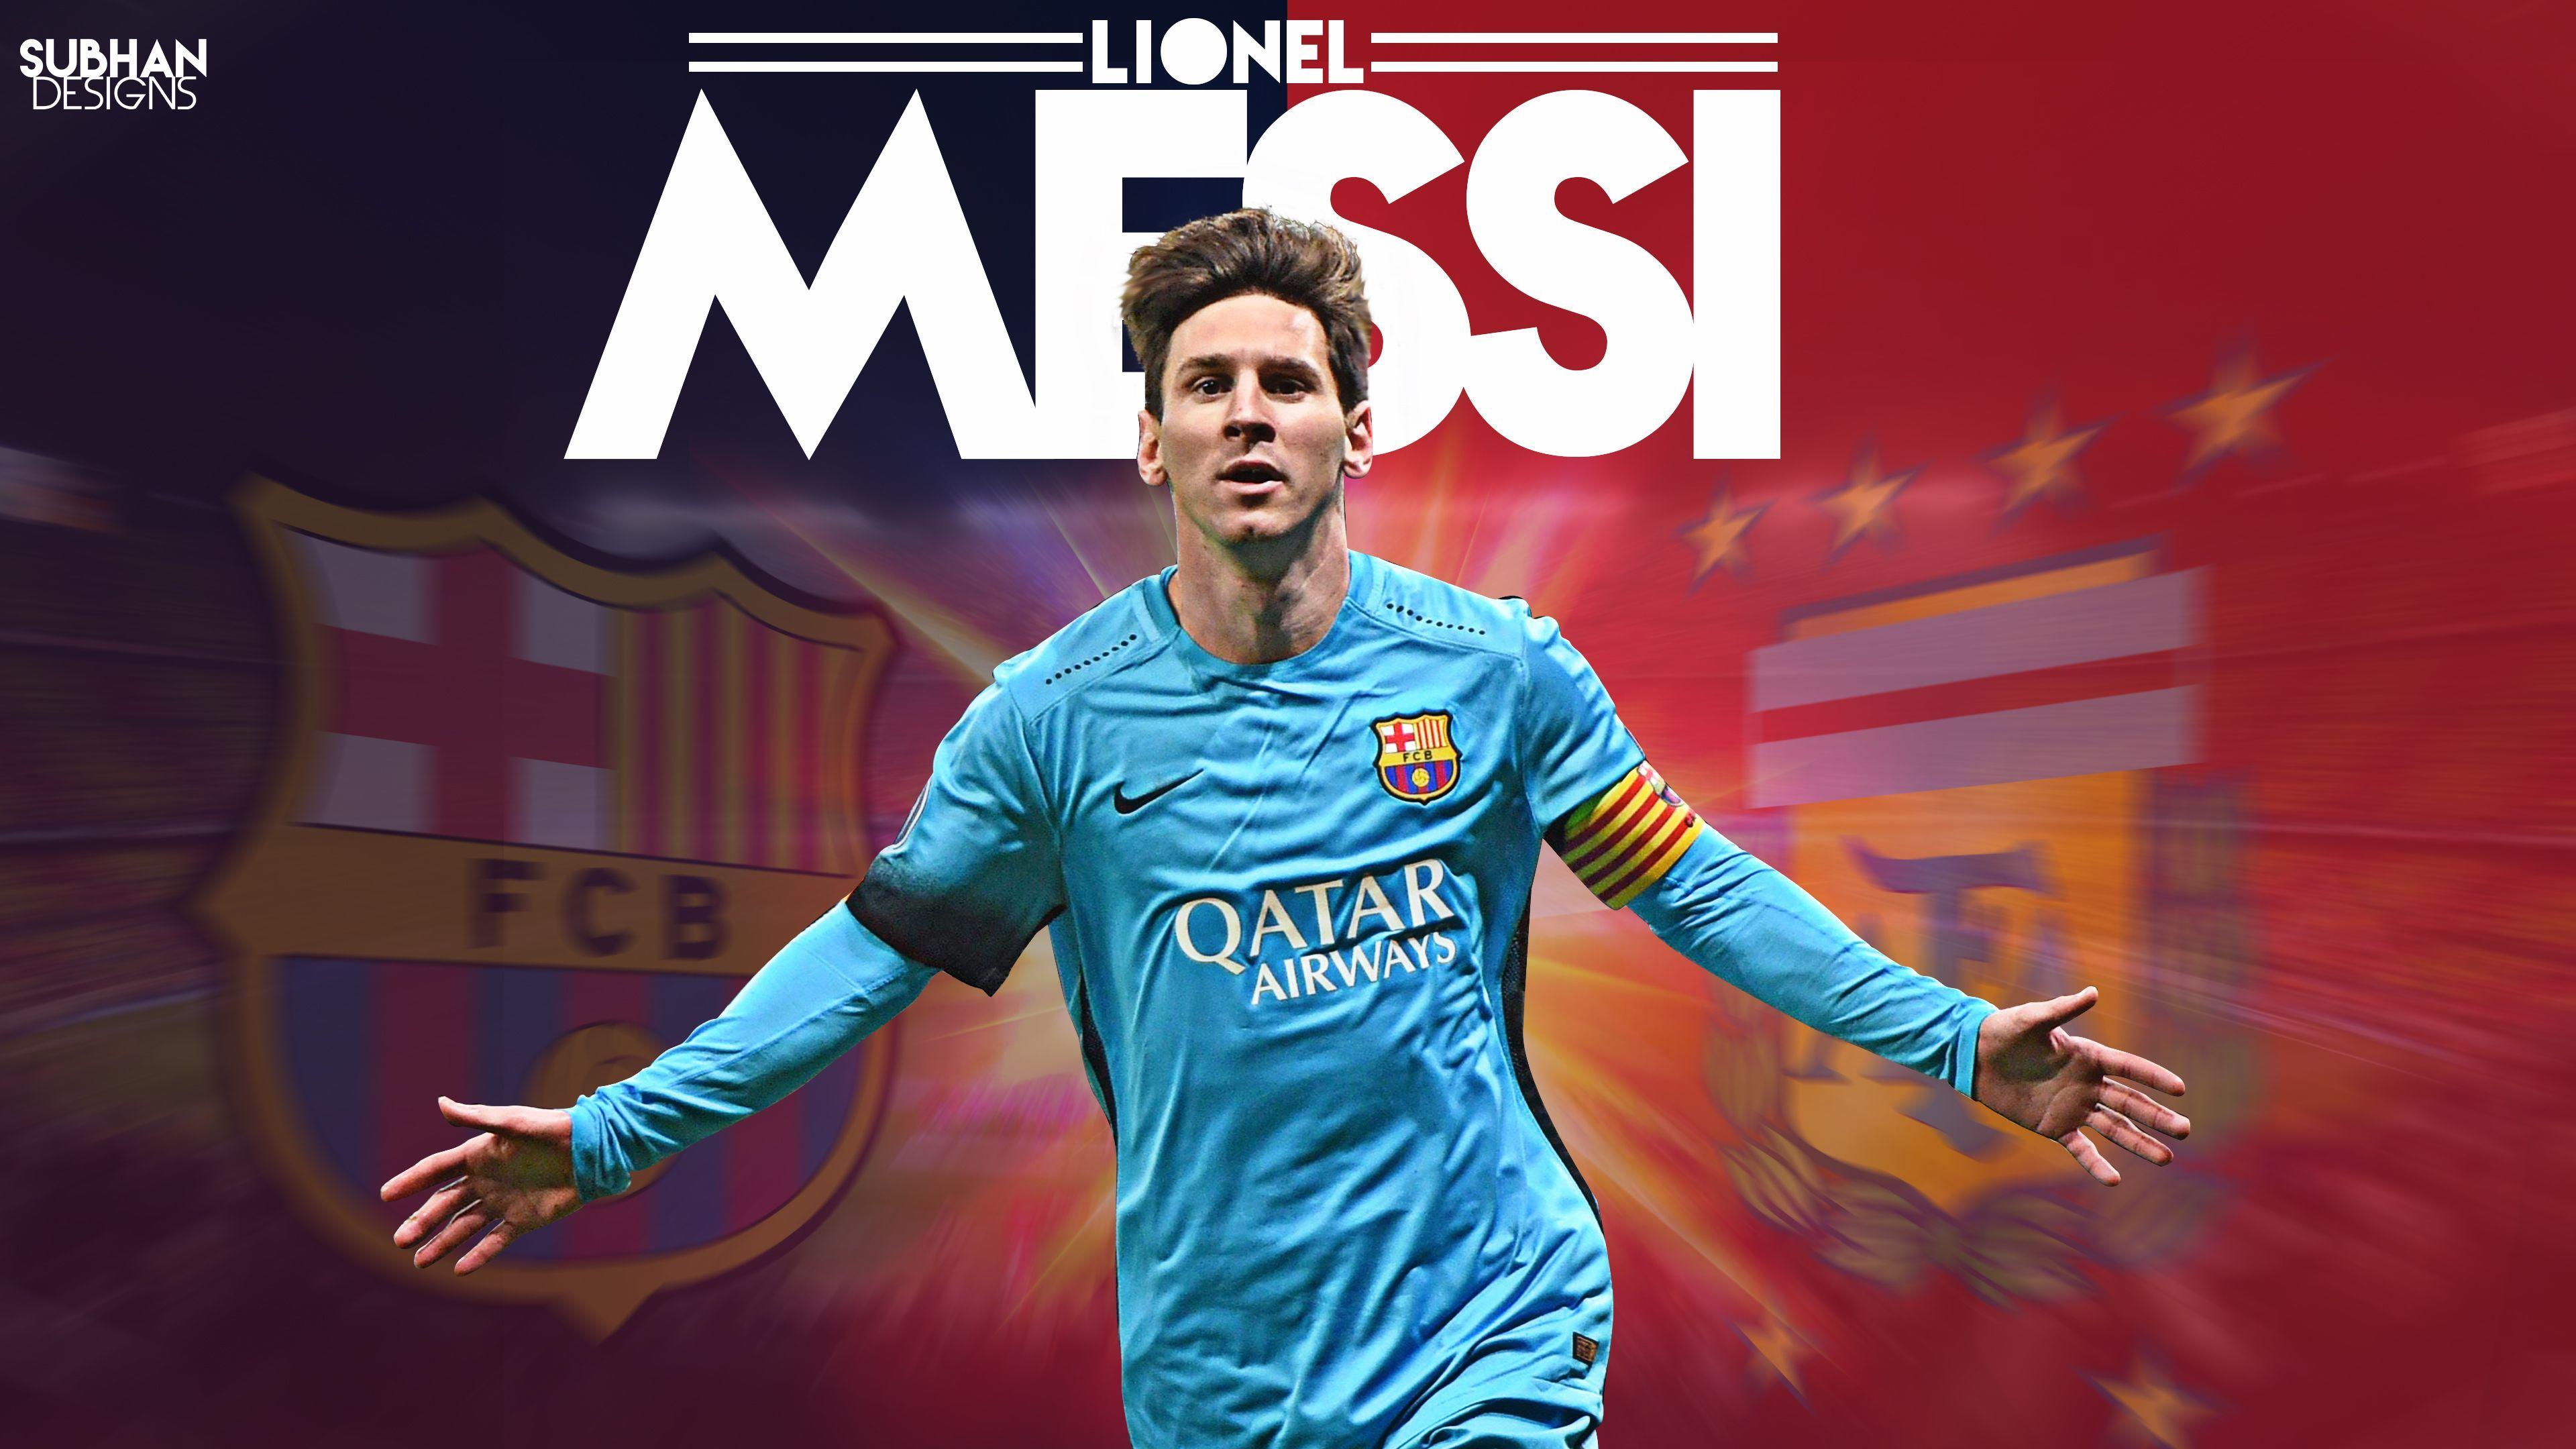 Lionel Messi 2016 wallpapers 4K by subhan22